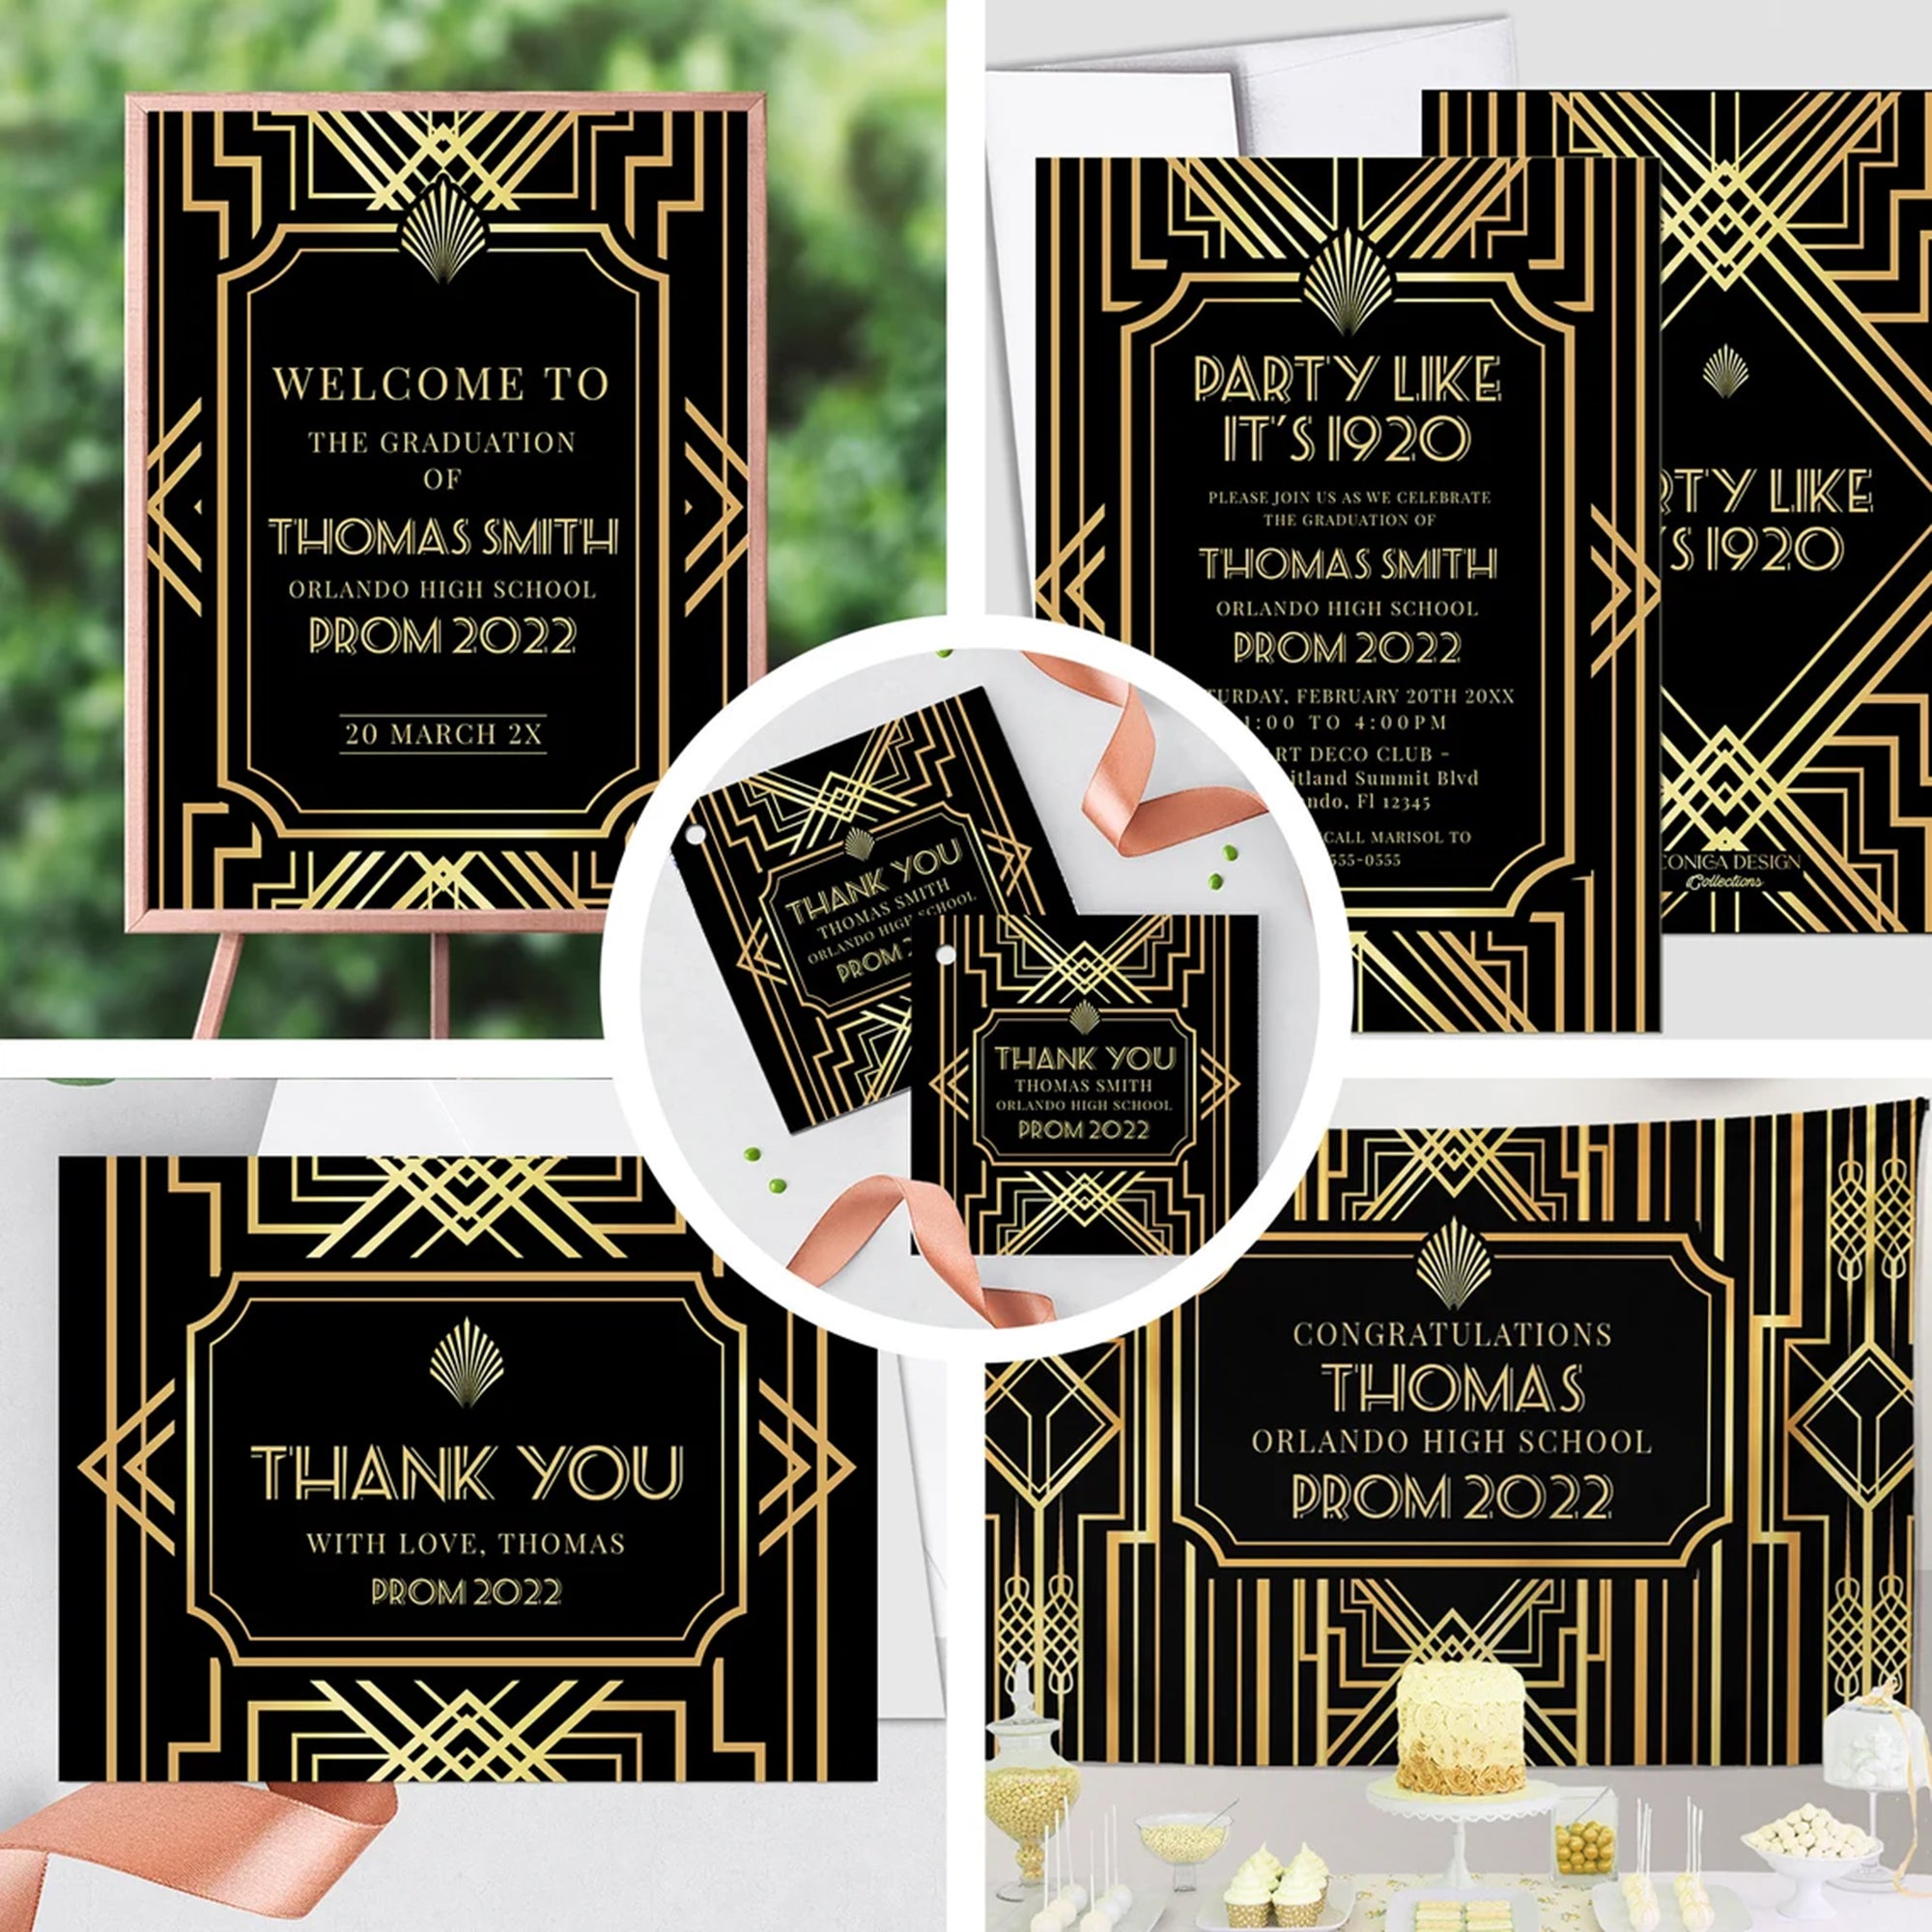 Roaring 20s Invitation and Decorations for Graduation, Great